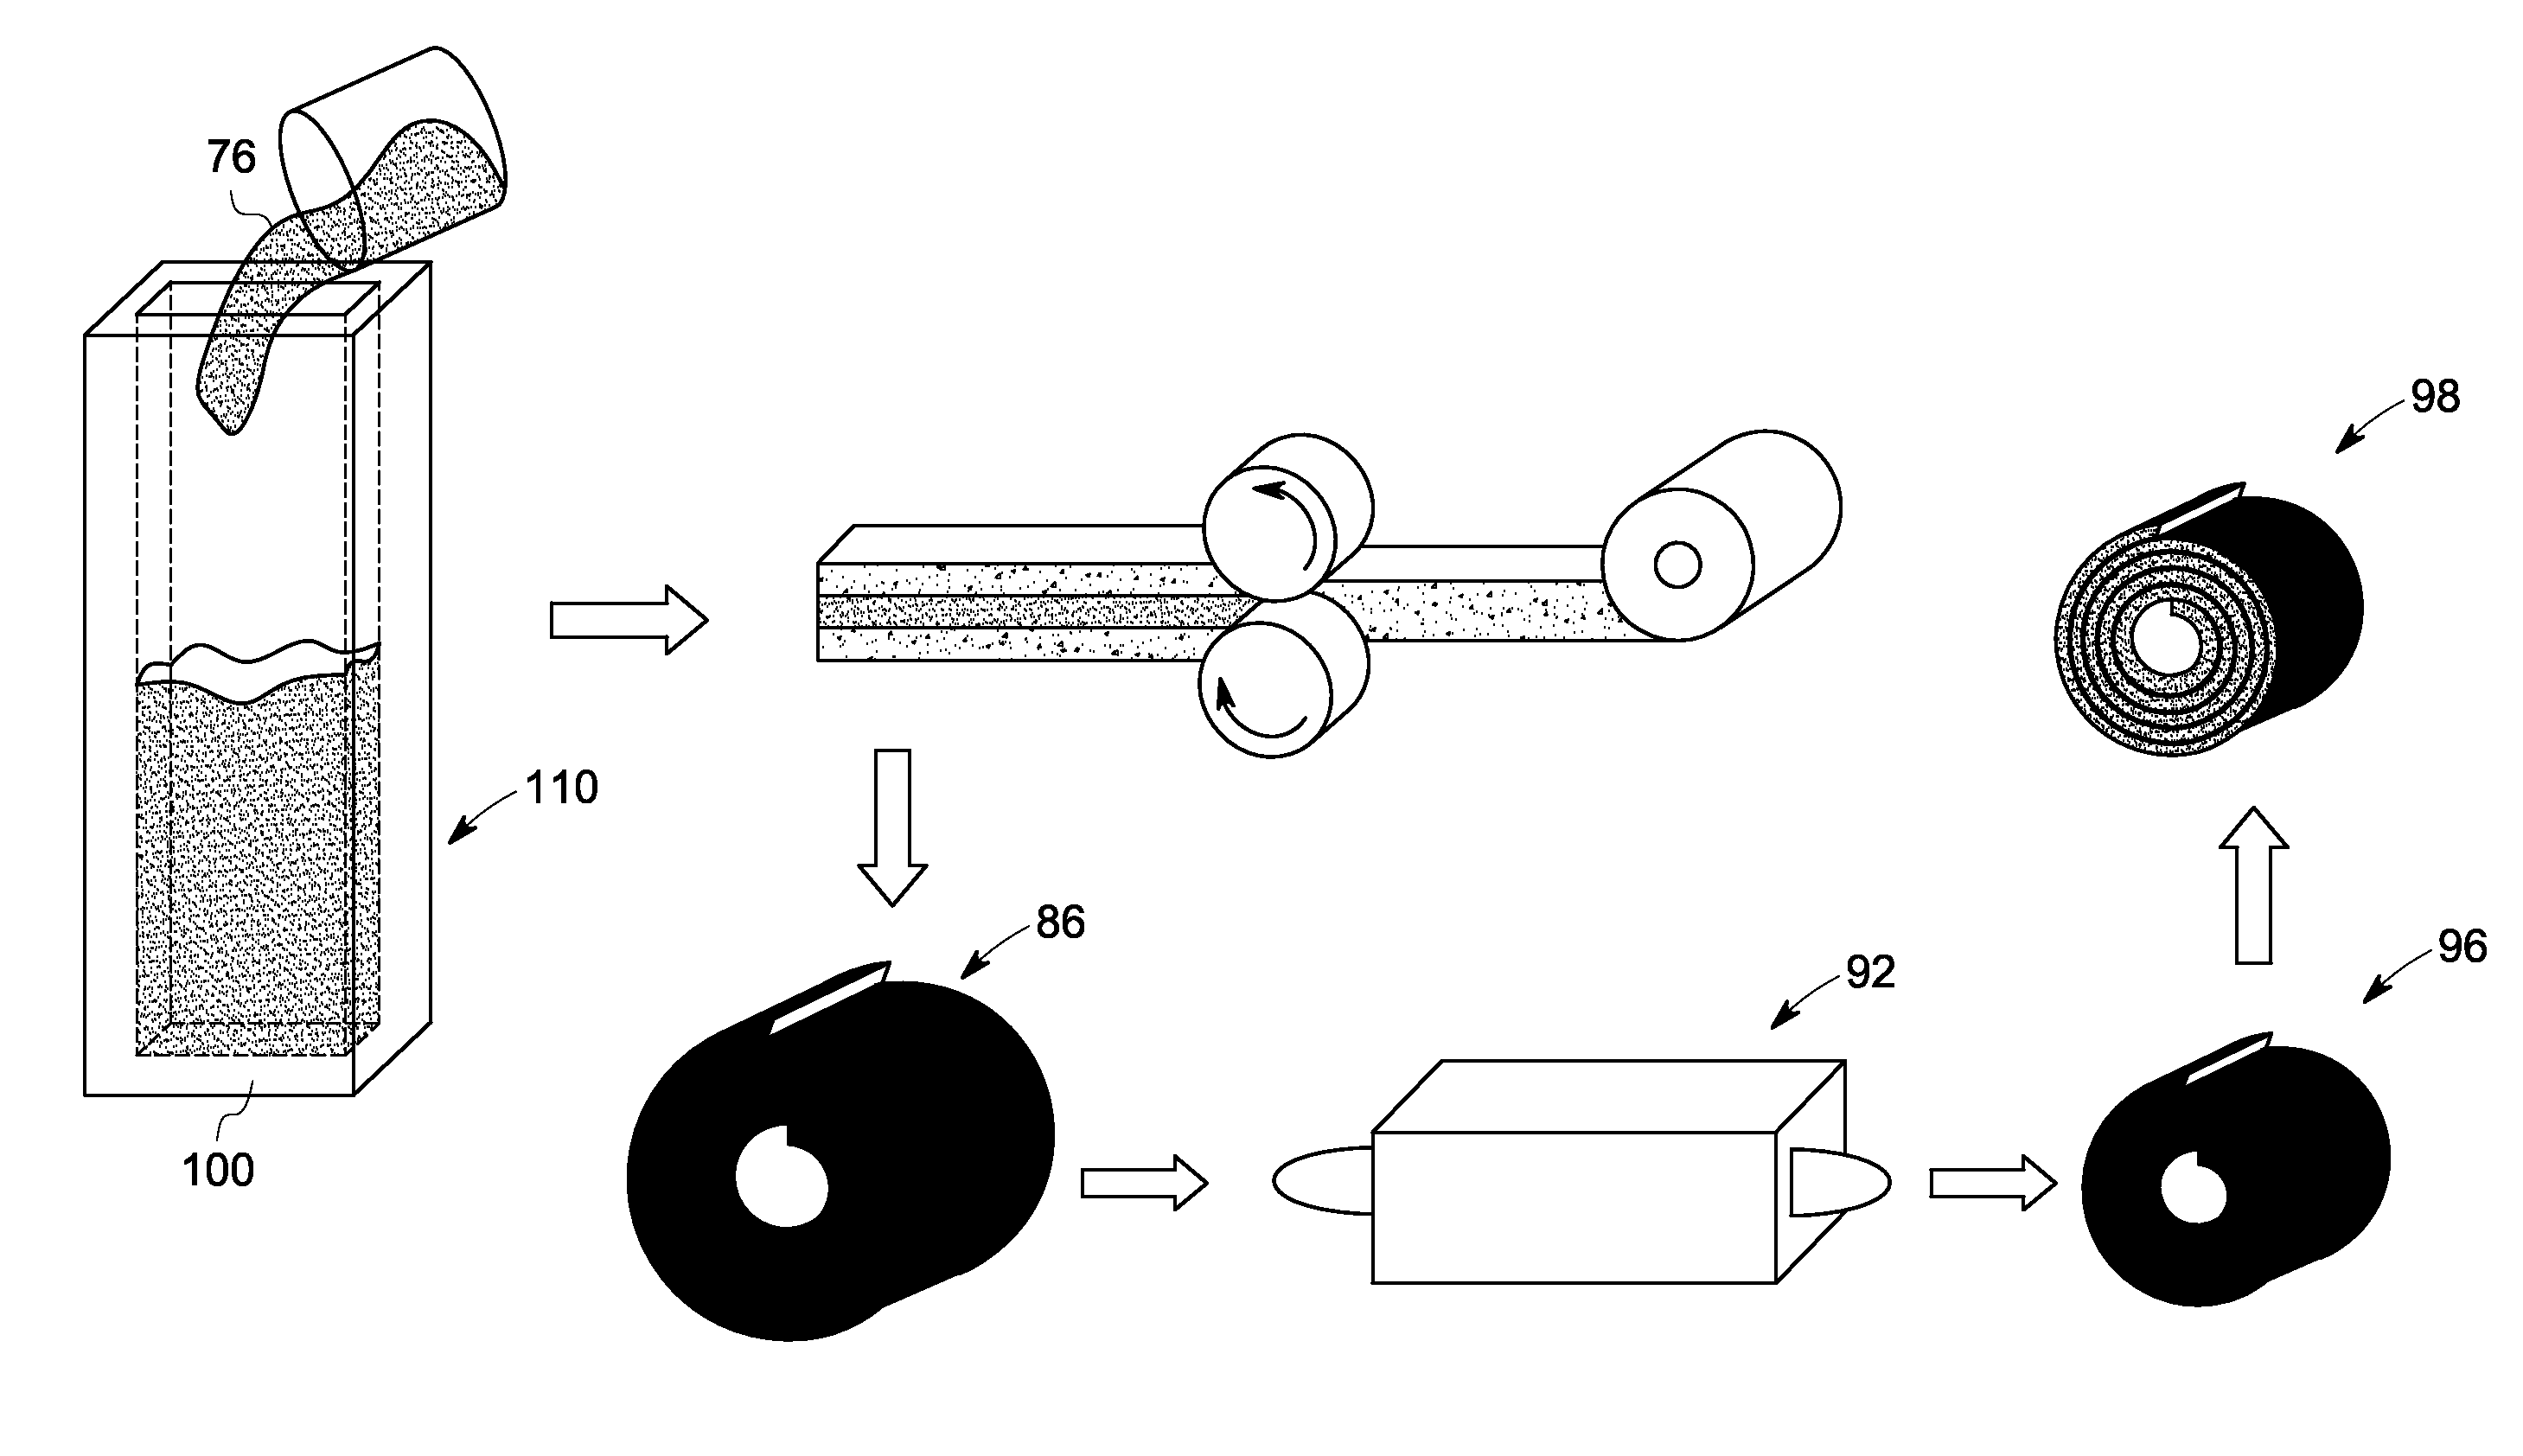 Resonator structures and method of making